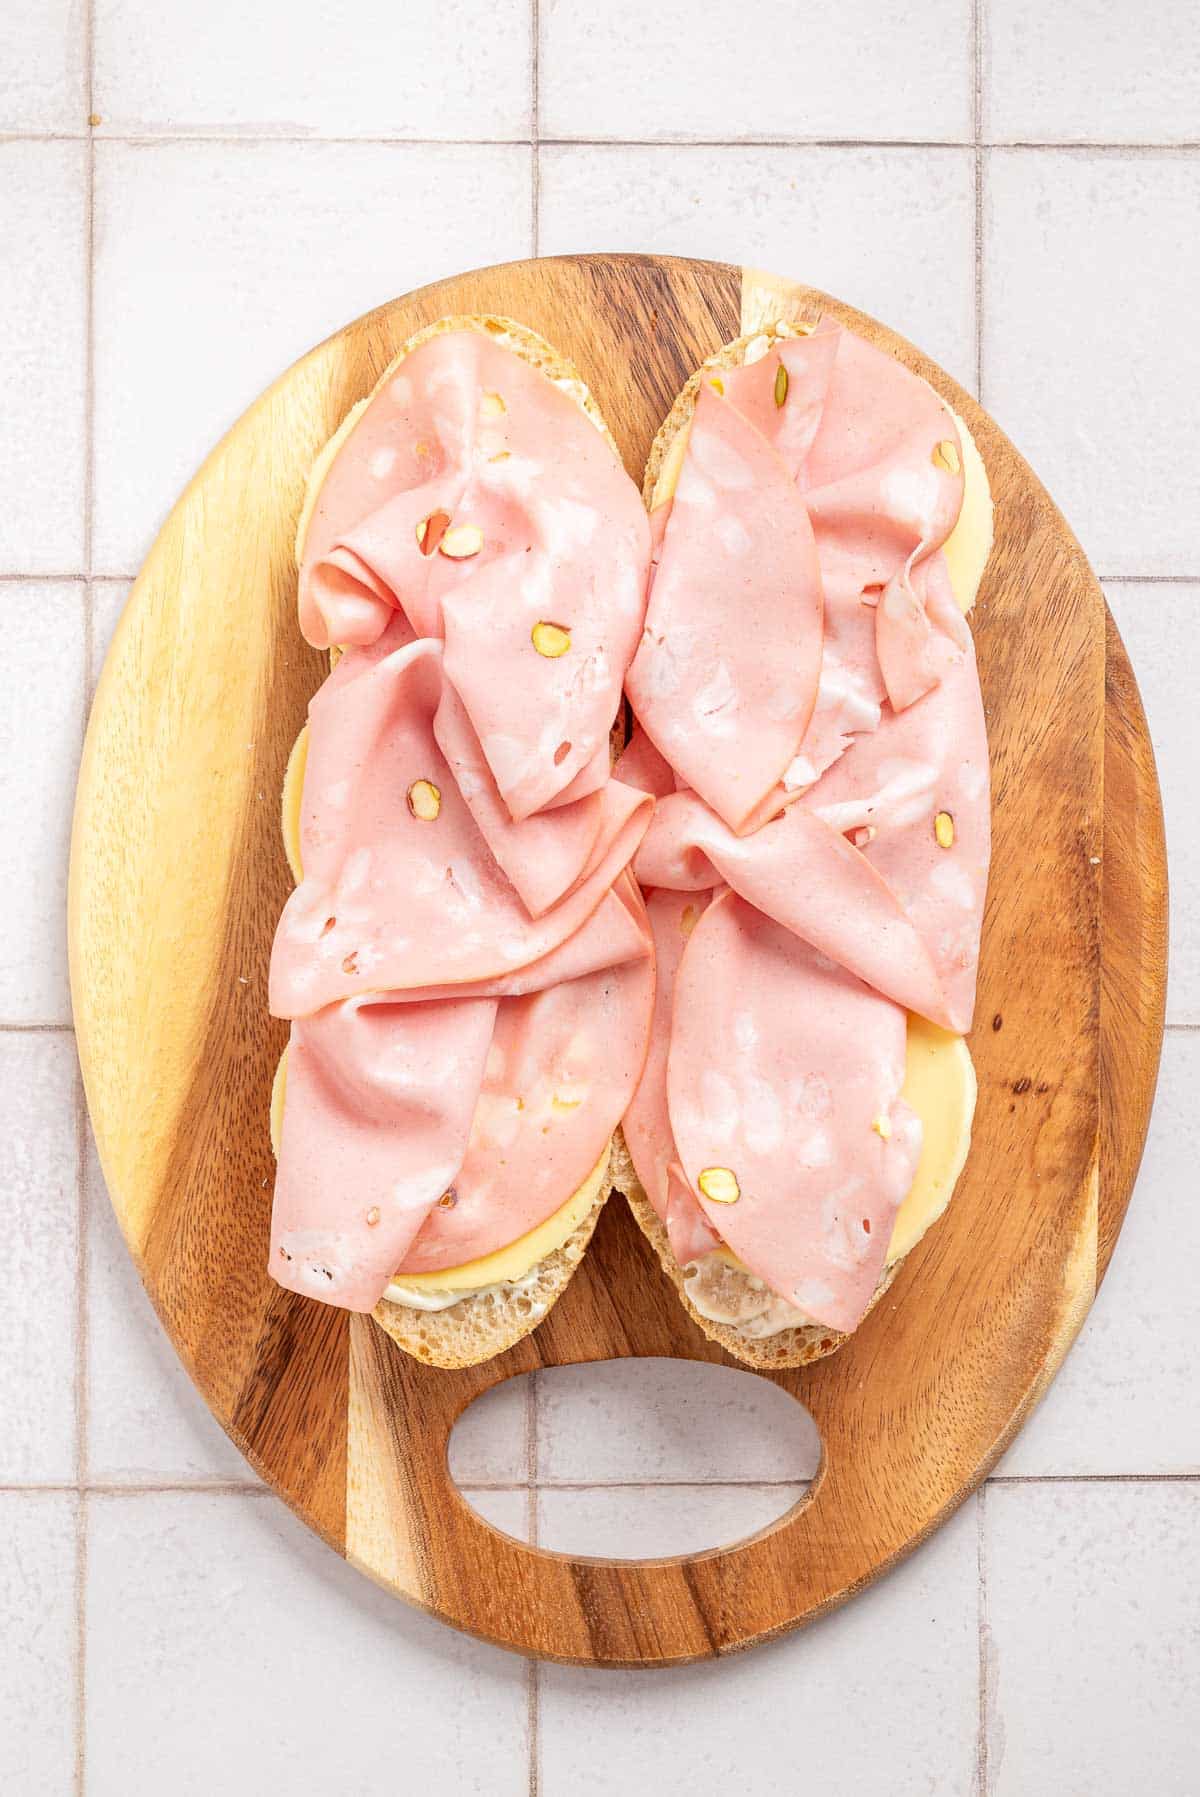 A sandwich with mortadella added on a wooden board.